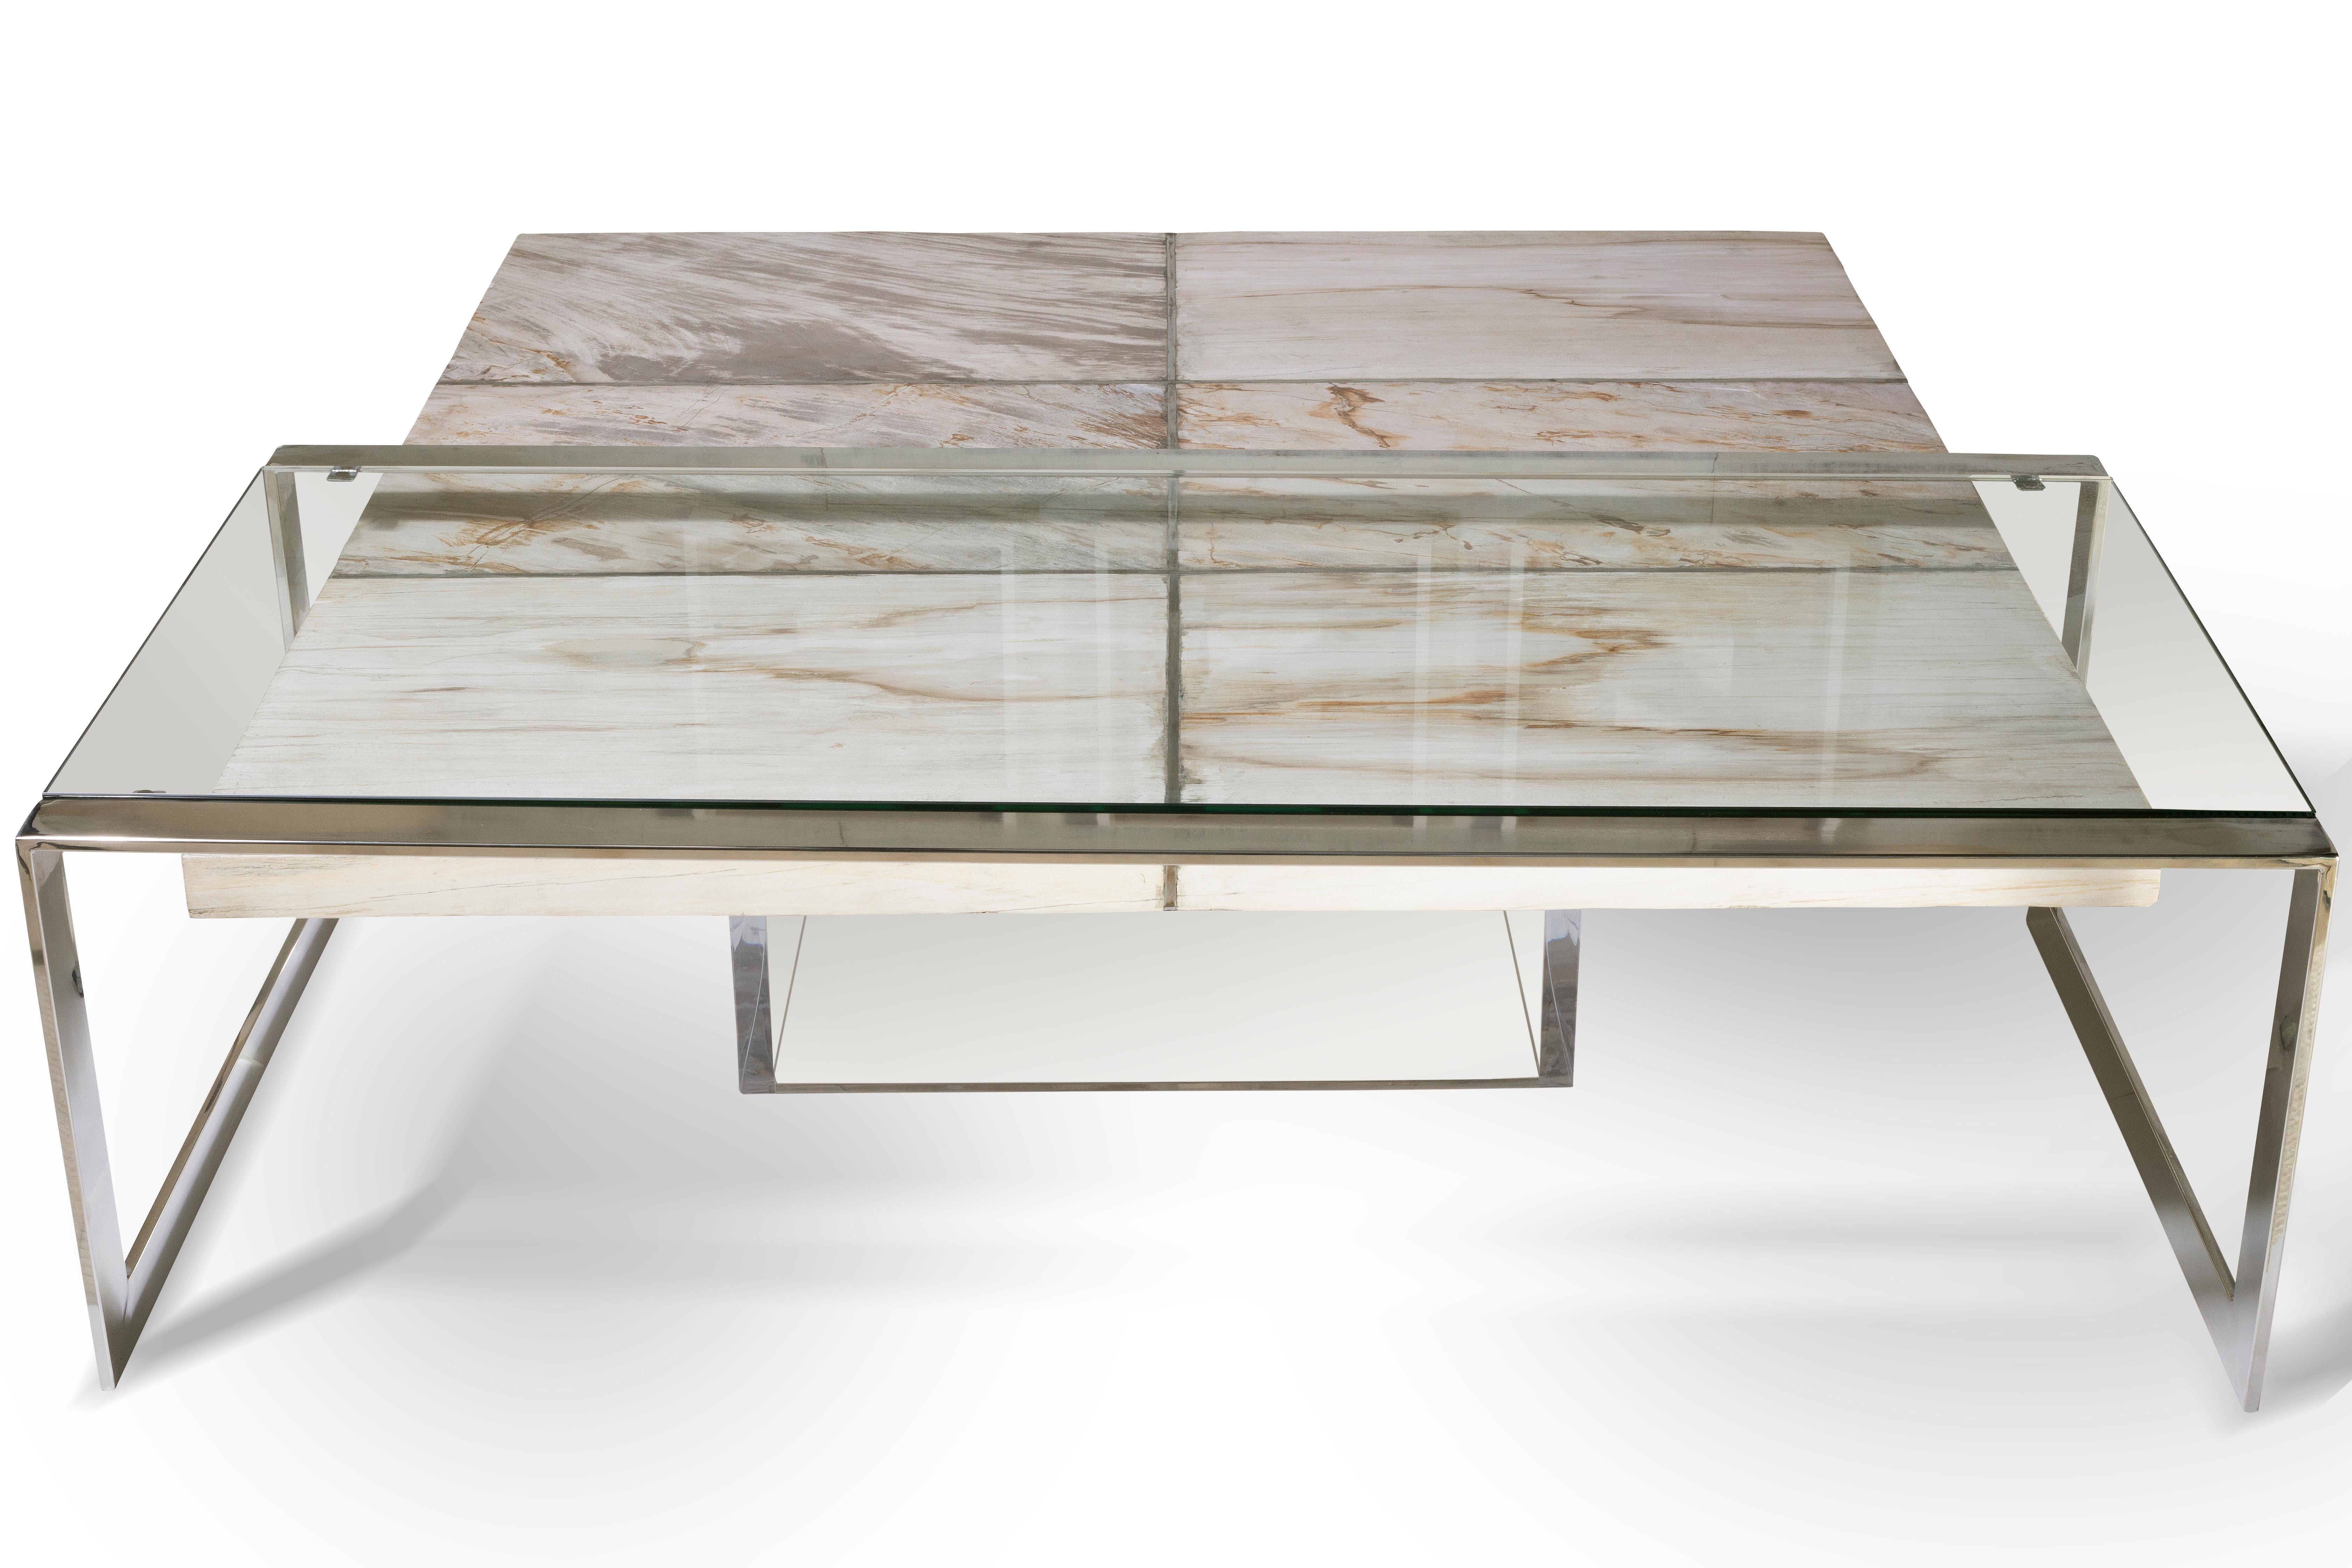 Modern Square Acrylic and Wooden Coffee Table, Petra Coffee Table For Sale